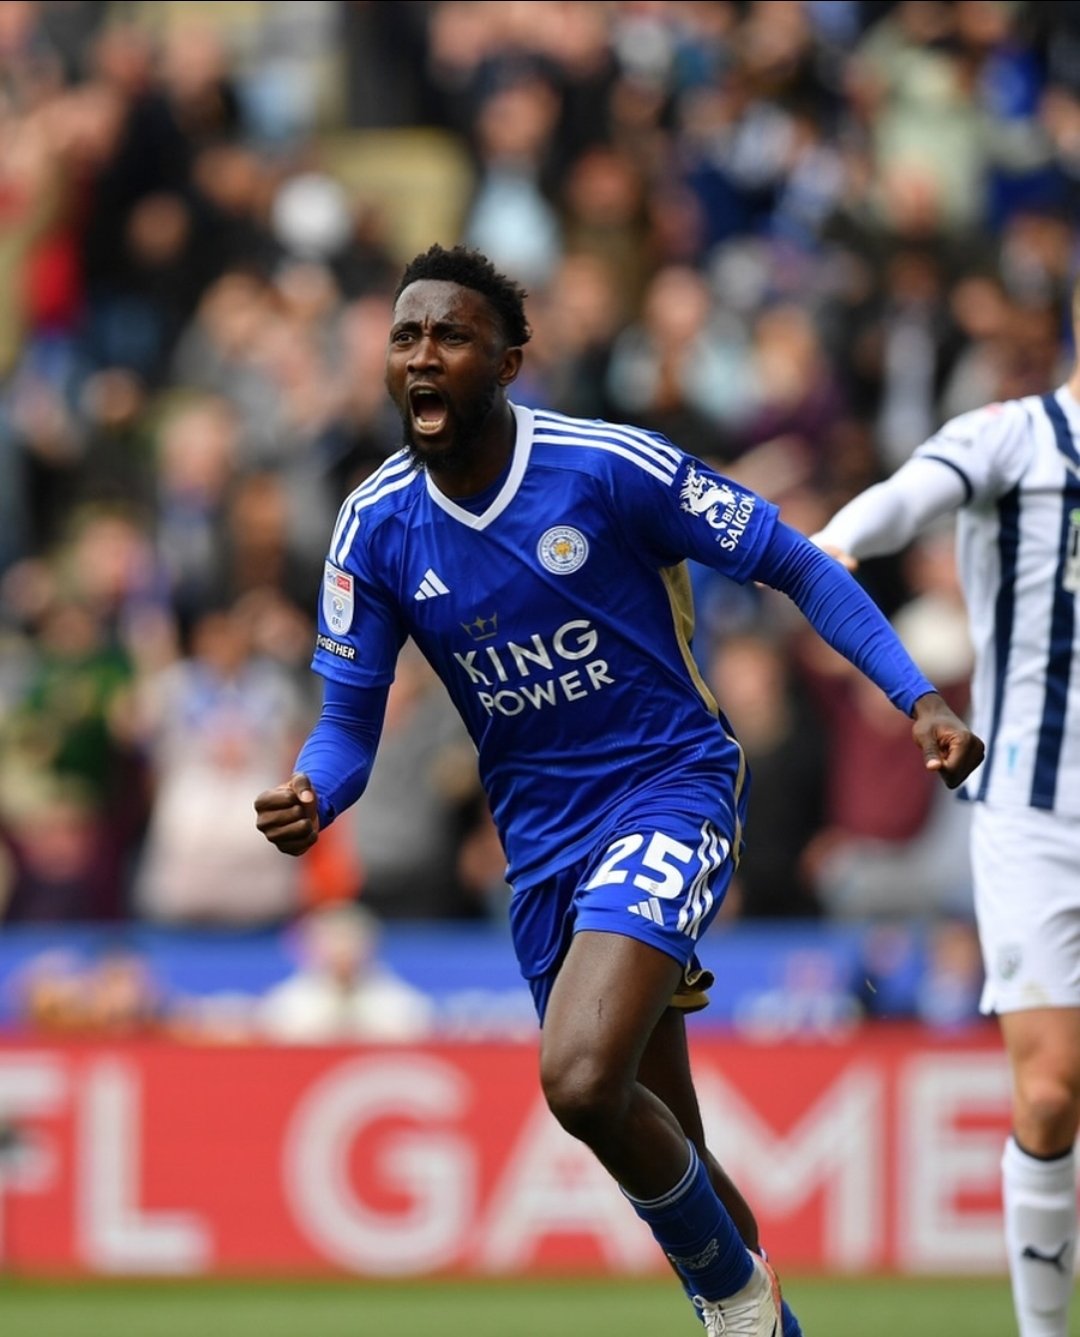 EXCLUSIVE: Ndidi targets Premier League High-6 or no switch